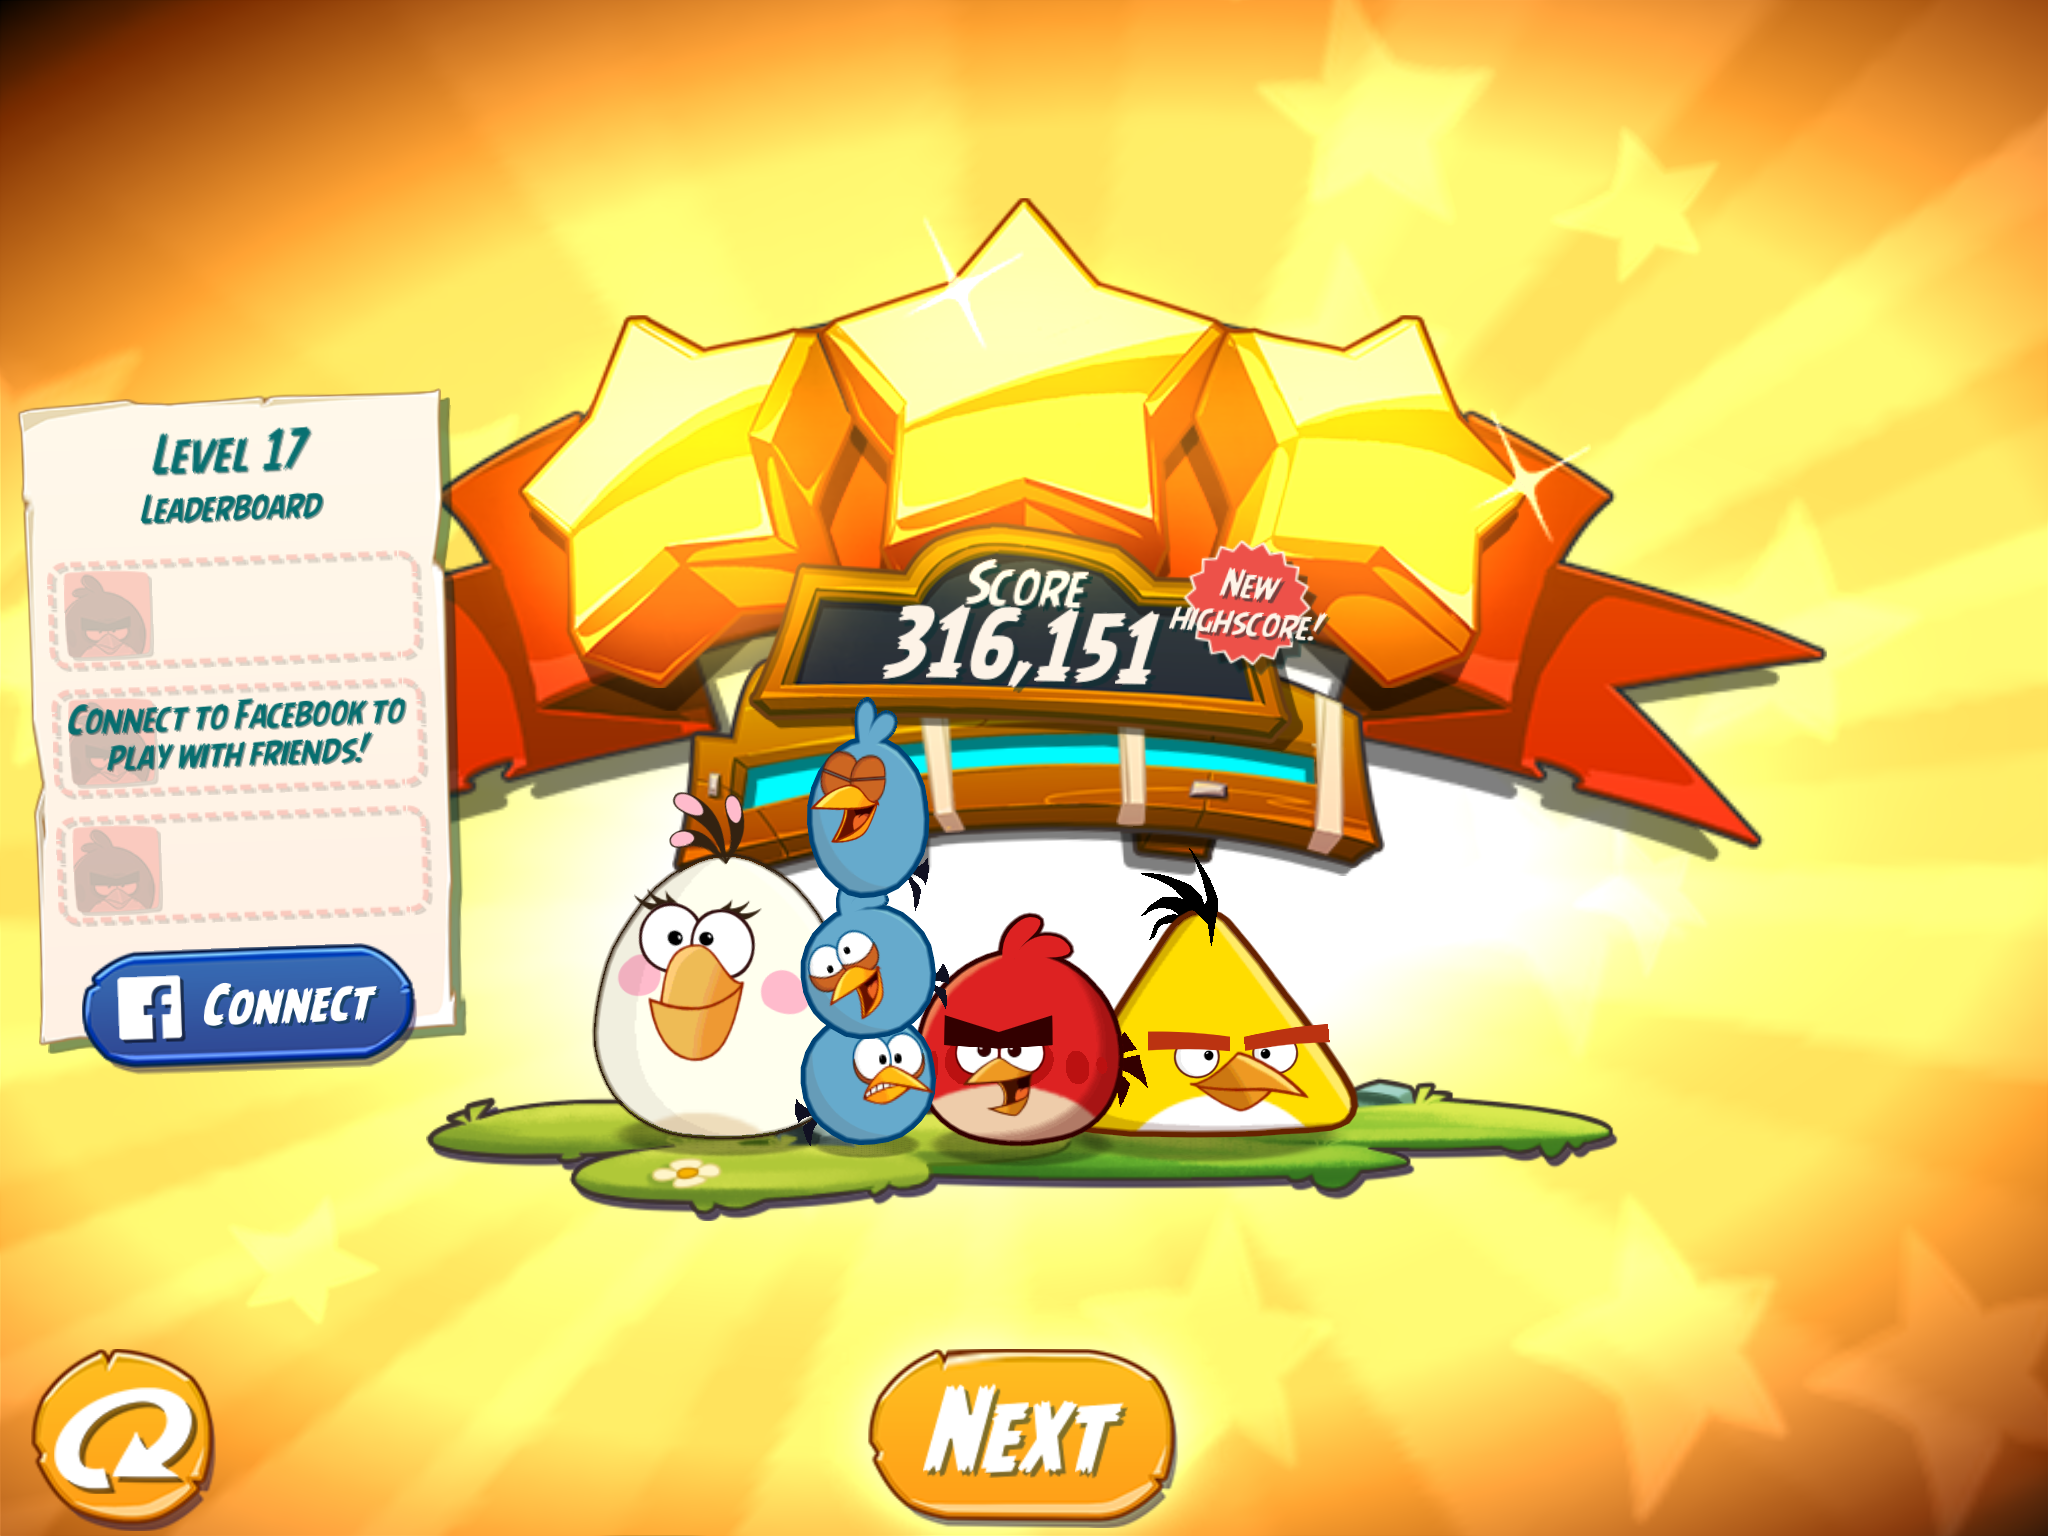 Angry Birds 2: Level 17 316,151 points